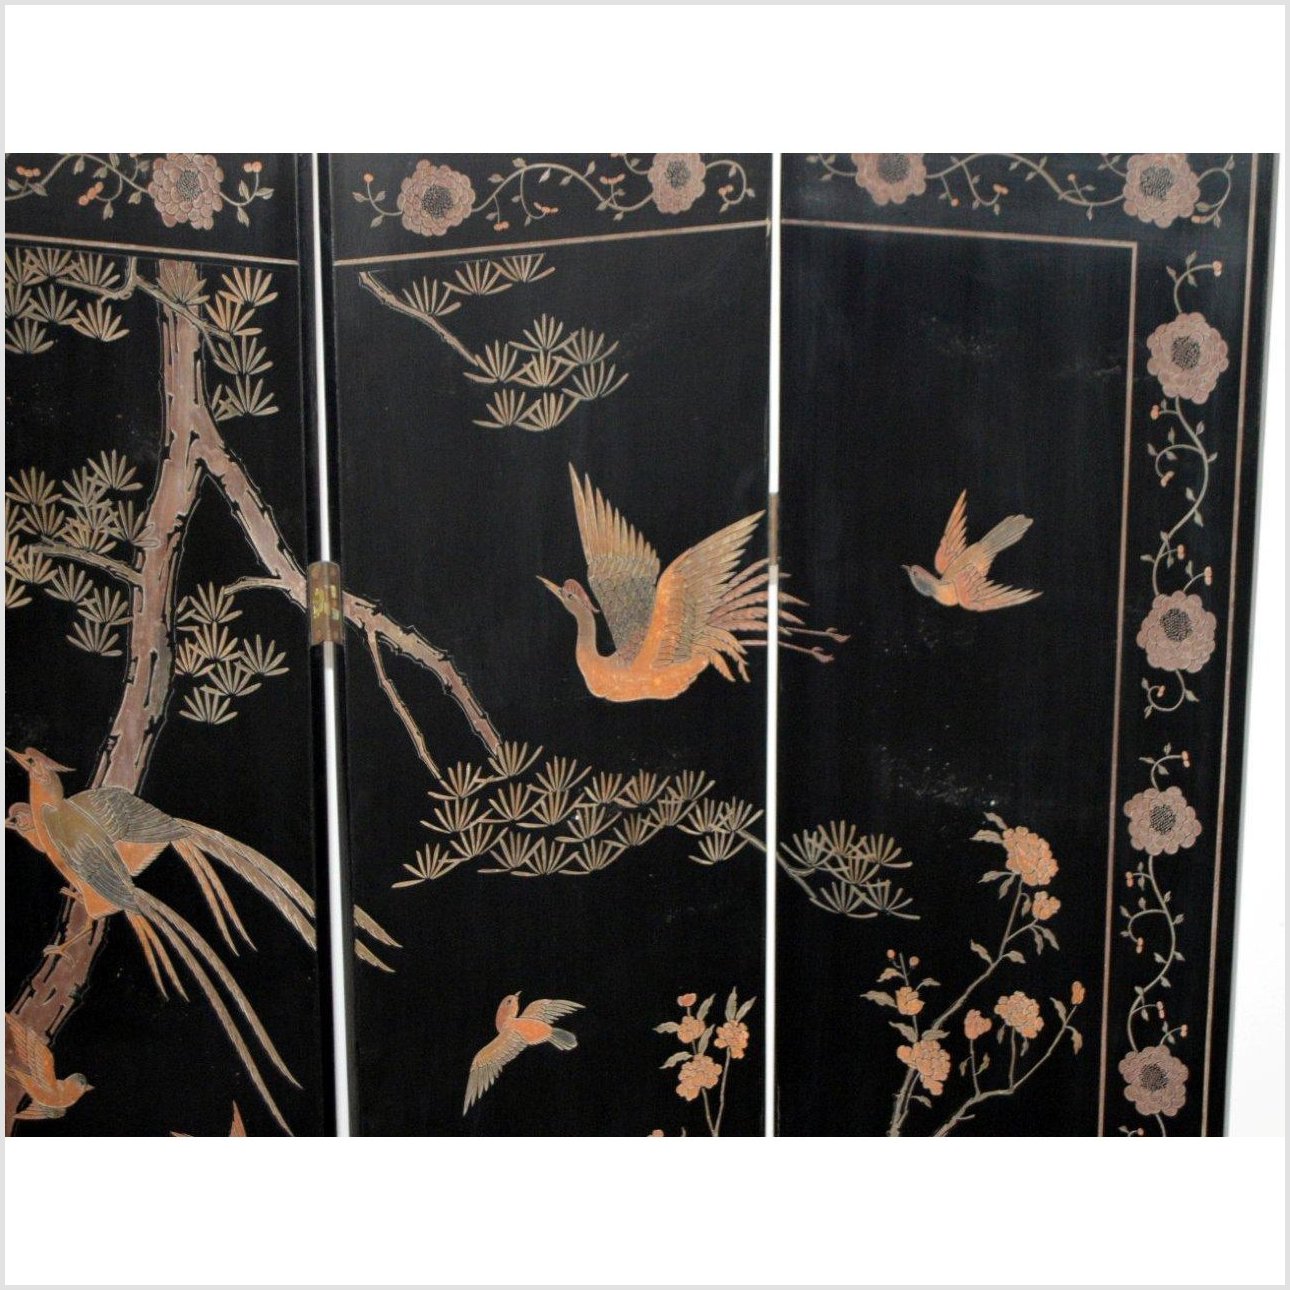 4-Panel Black Screen Designed with Trees, Birds and Flowers-YN2889-11. Asian & Chinese Furniture, Art, Antiques, Vintage Home Décor for sale at FEA Home